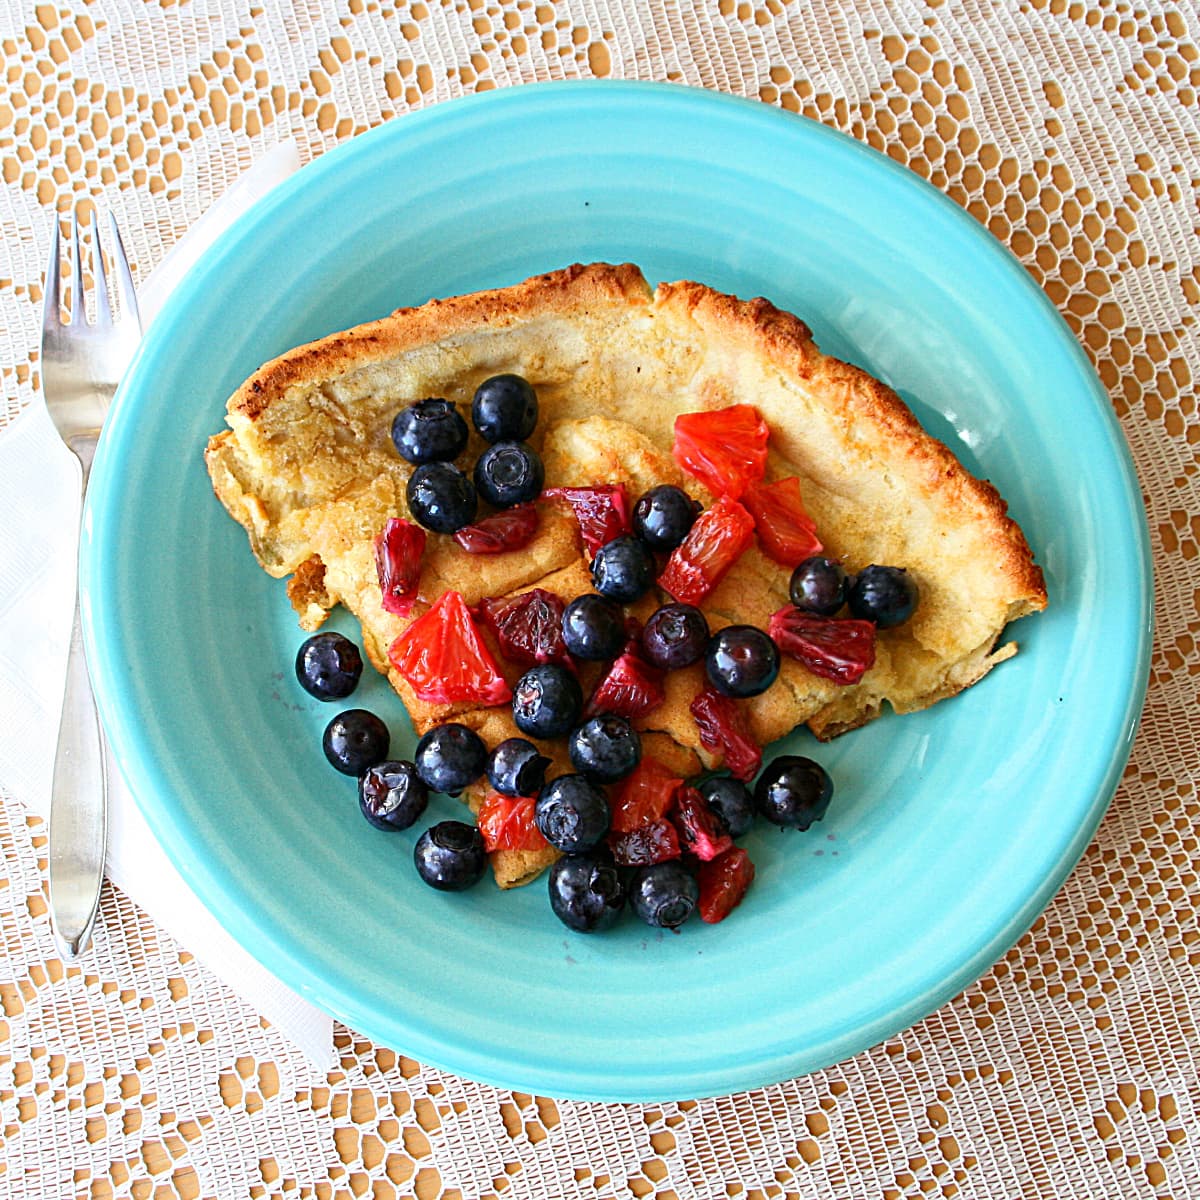 Dutch Baby Oven Pancake is a light, popover-like pancake that puffs up high in the oven and deflates upon cutting. Top with berries and fresh fruit for a perfect breakfast.